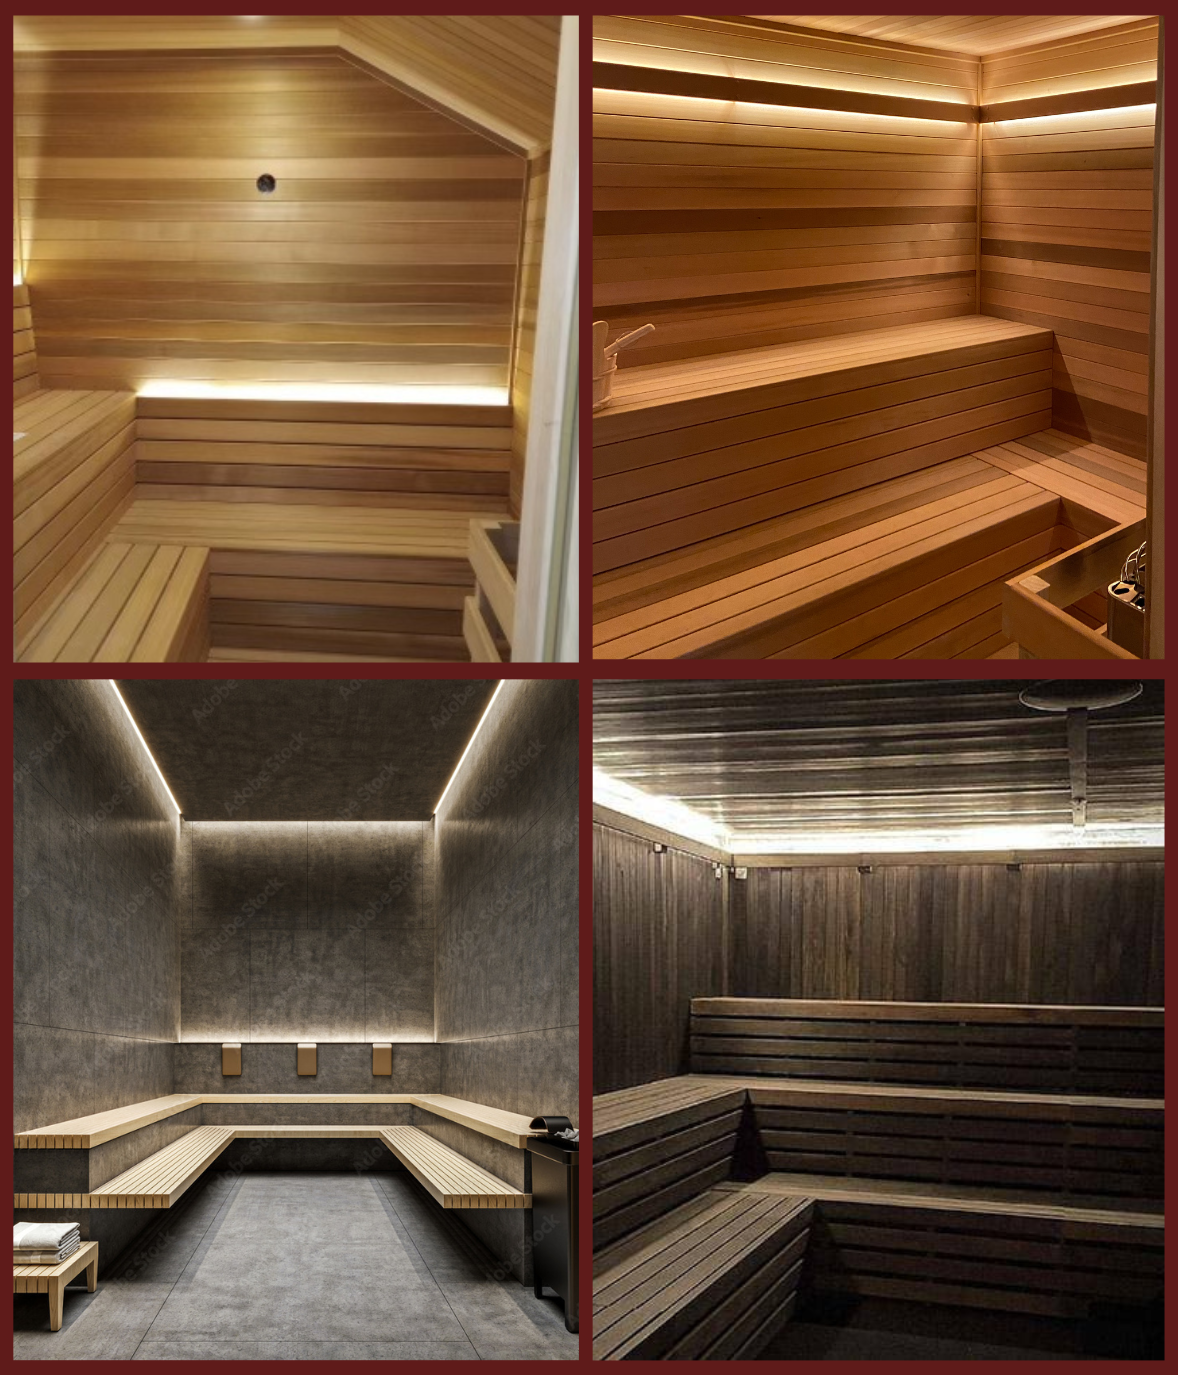 Home Sauna Designs: Choosing the Best For Your Health and Wellness